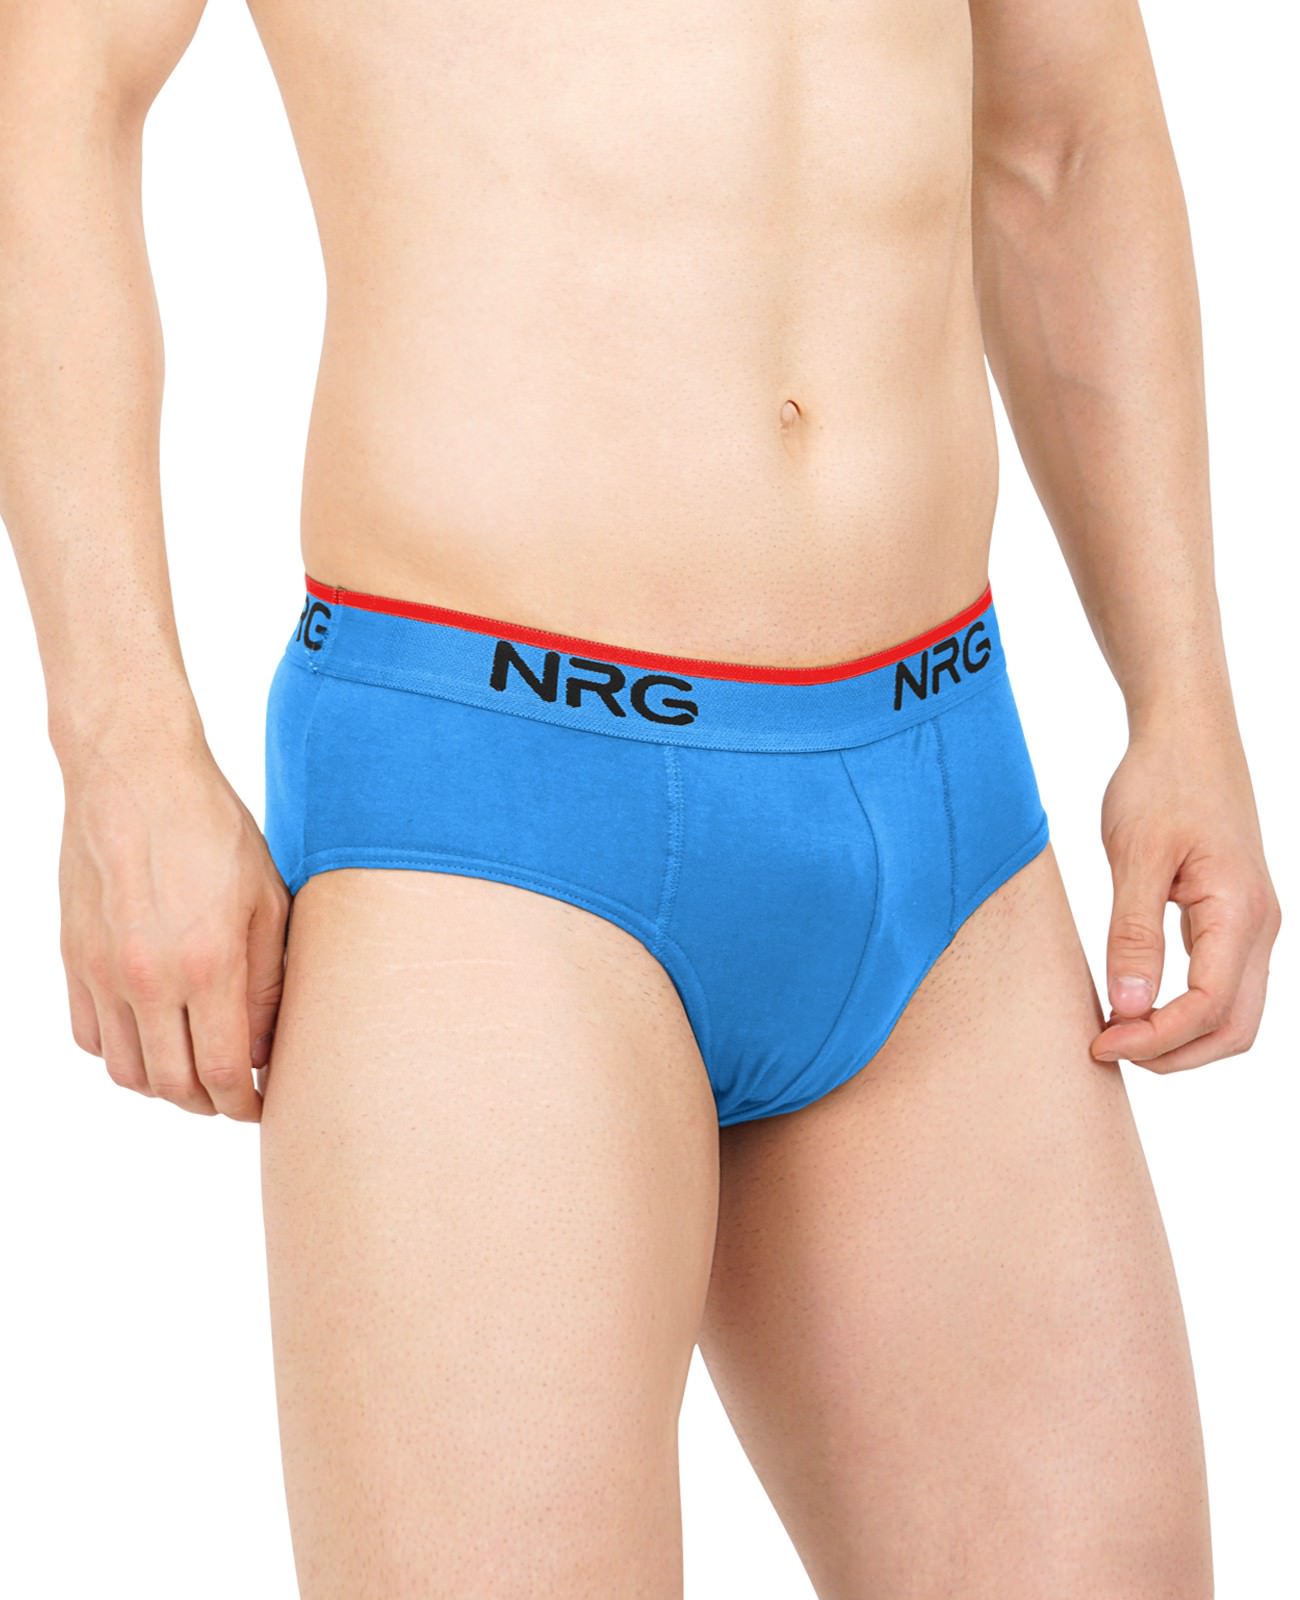 NRG Impex Blue Colour Brief for Gents